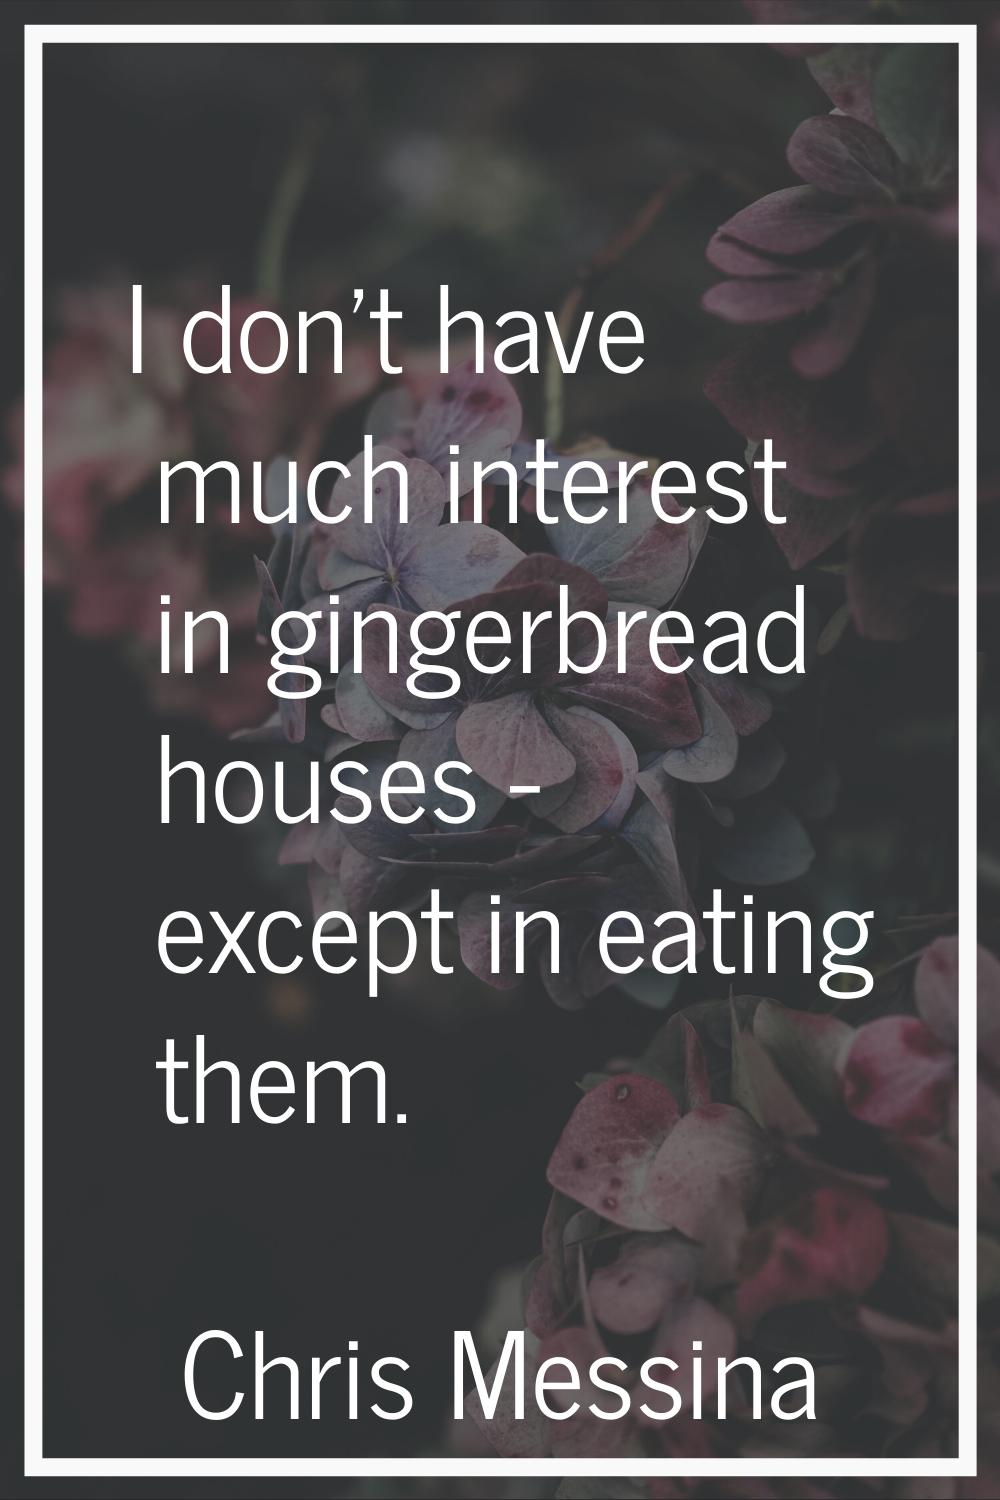 I don't have much interest in gingerbread houses - except in eating them.